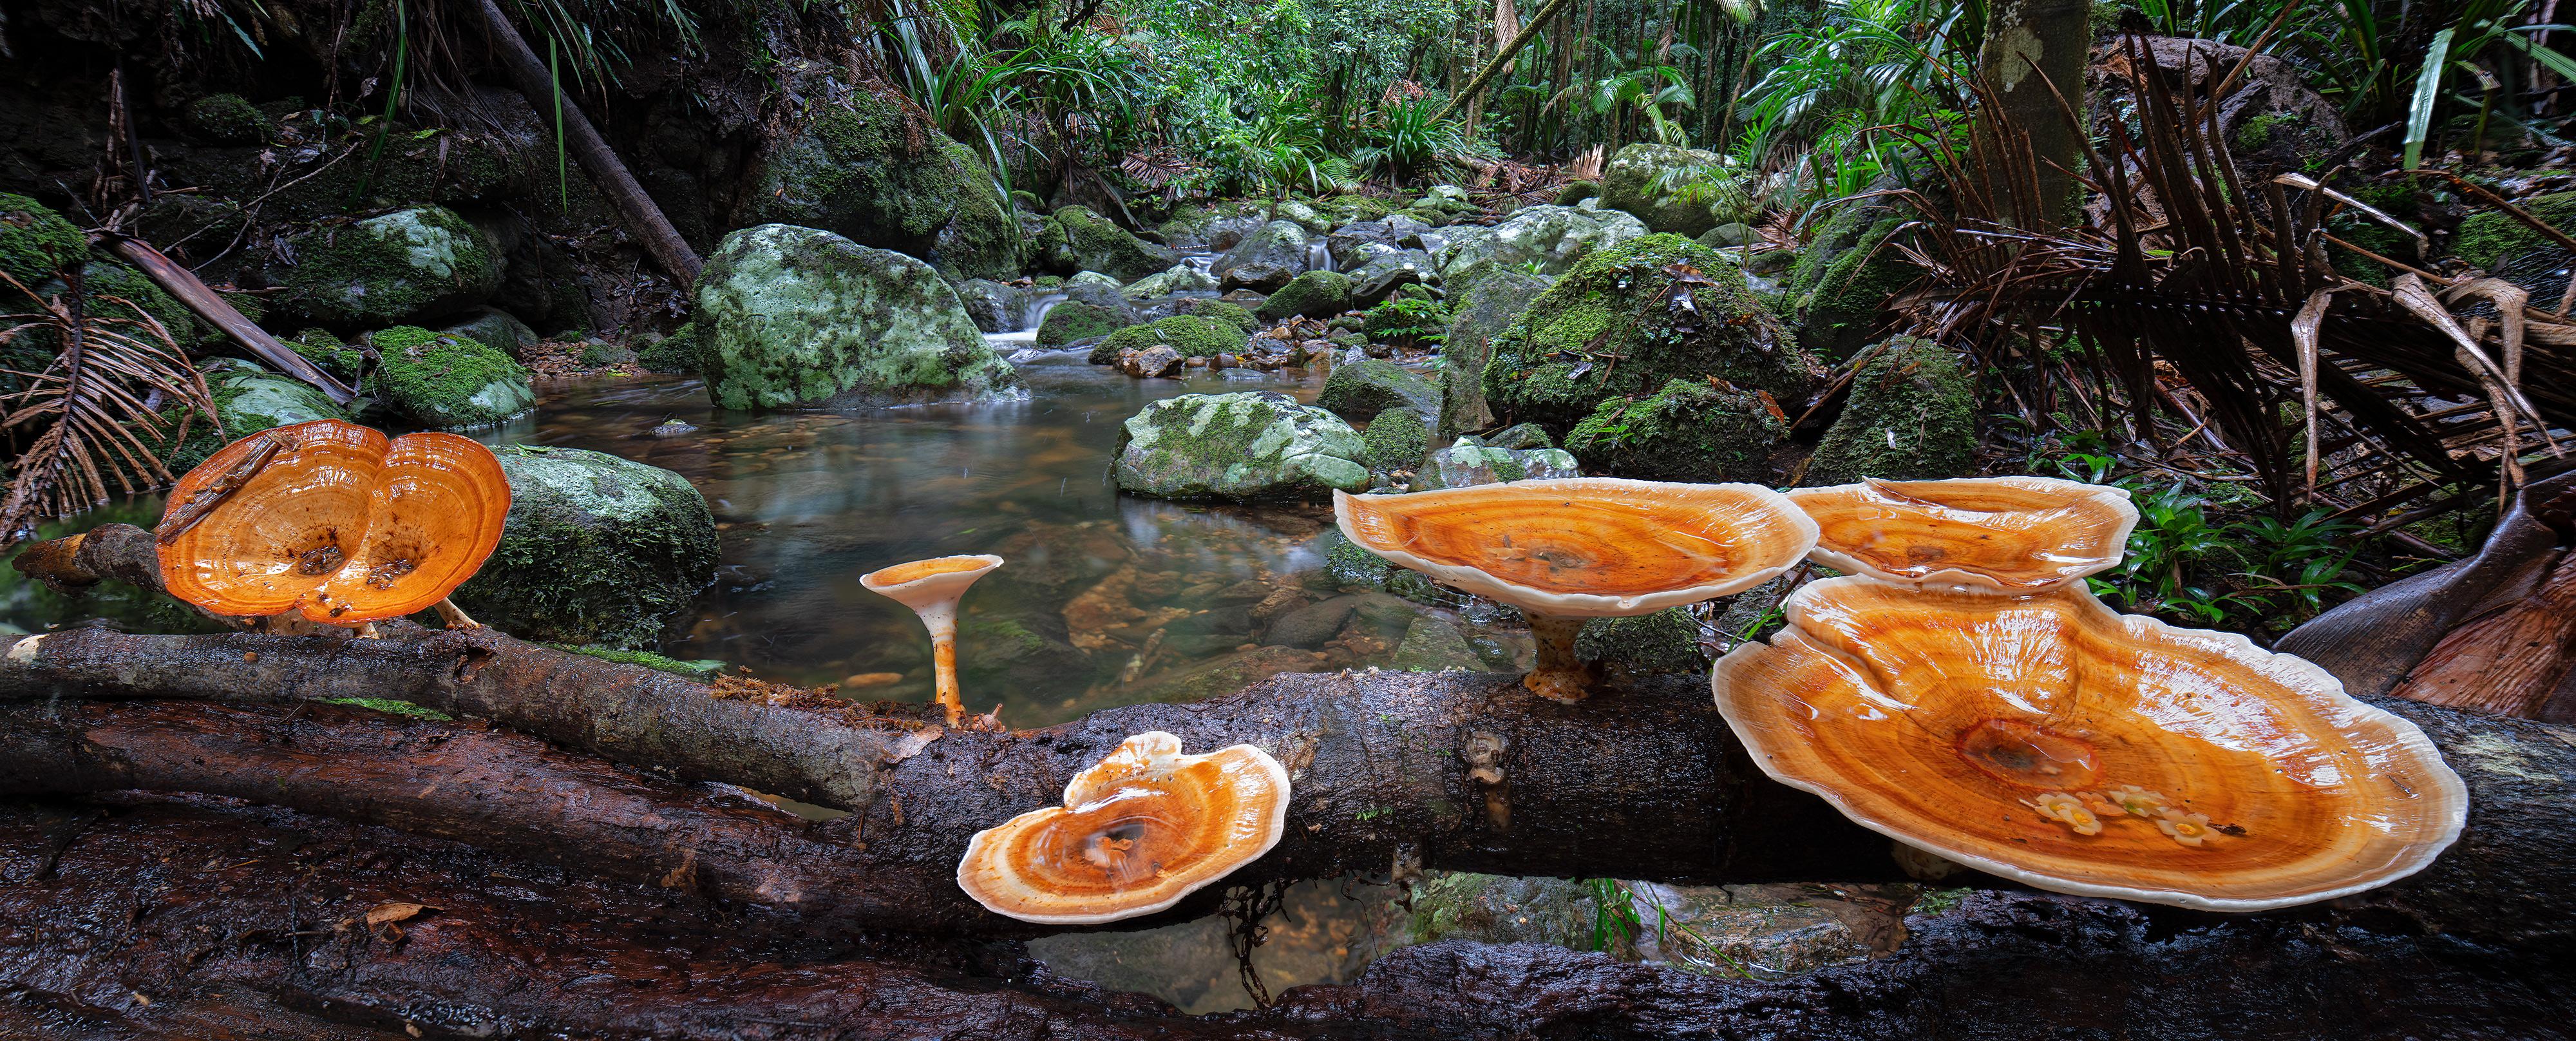 The Hong Kong Space Museum will launch a new dome show "Nature's Hidden Kingdom", at its Space Theatre tomorrow (January 13), taking audiences on a quest to find rare and bizarre fungi in one of the most ancient temperate rainforests on Earth, that of Tarkine in Tasmania, Australia. It will also explore how fungi might help mega-cities address severe environmental challenges facing them.